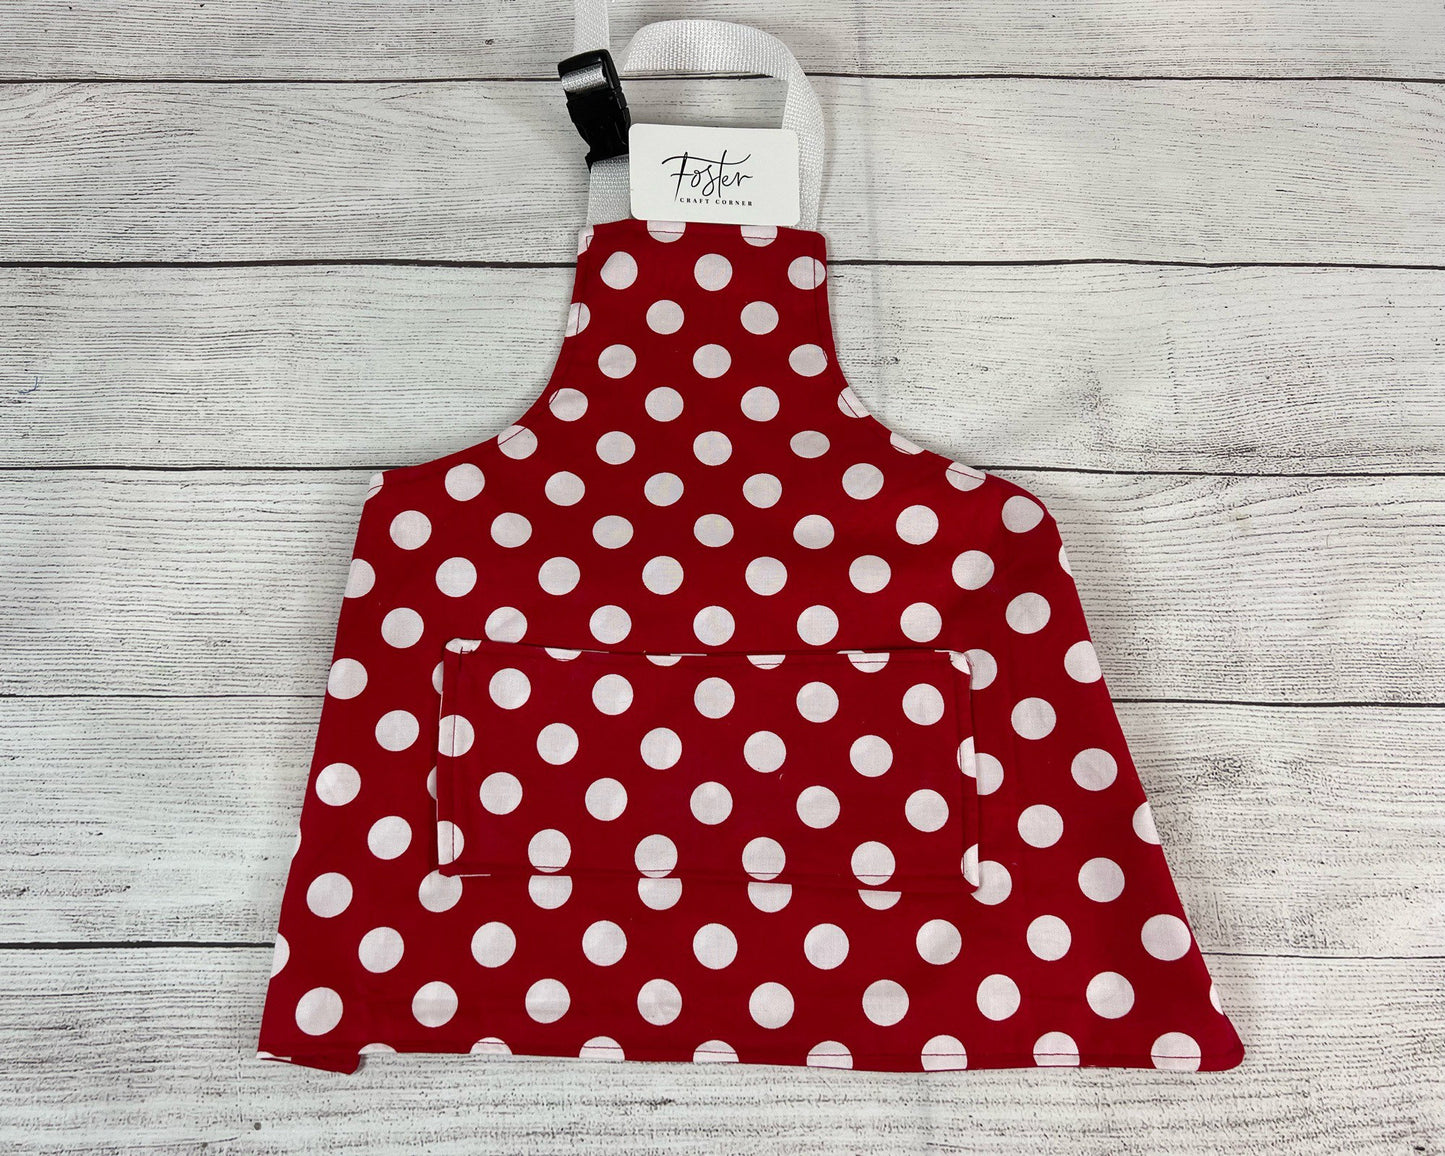 Toddler Apron - Kitchen - Cooking - Early Cooking Skills - Toddler Messes - Toddler Accessories - Polka Dot - Red and White - Small Apron